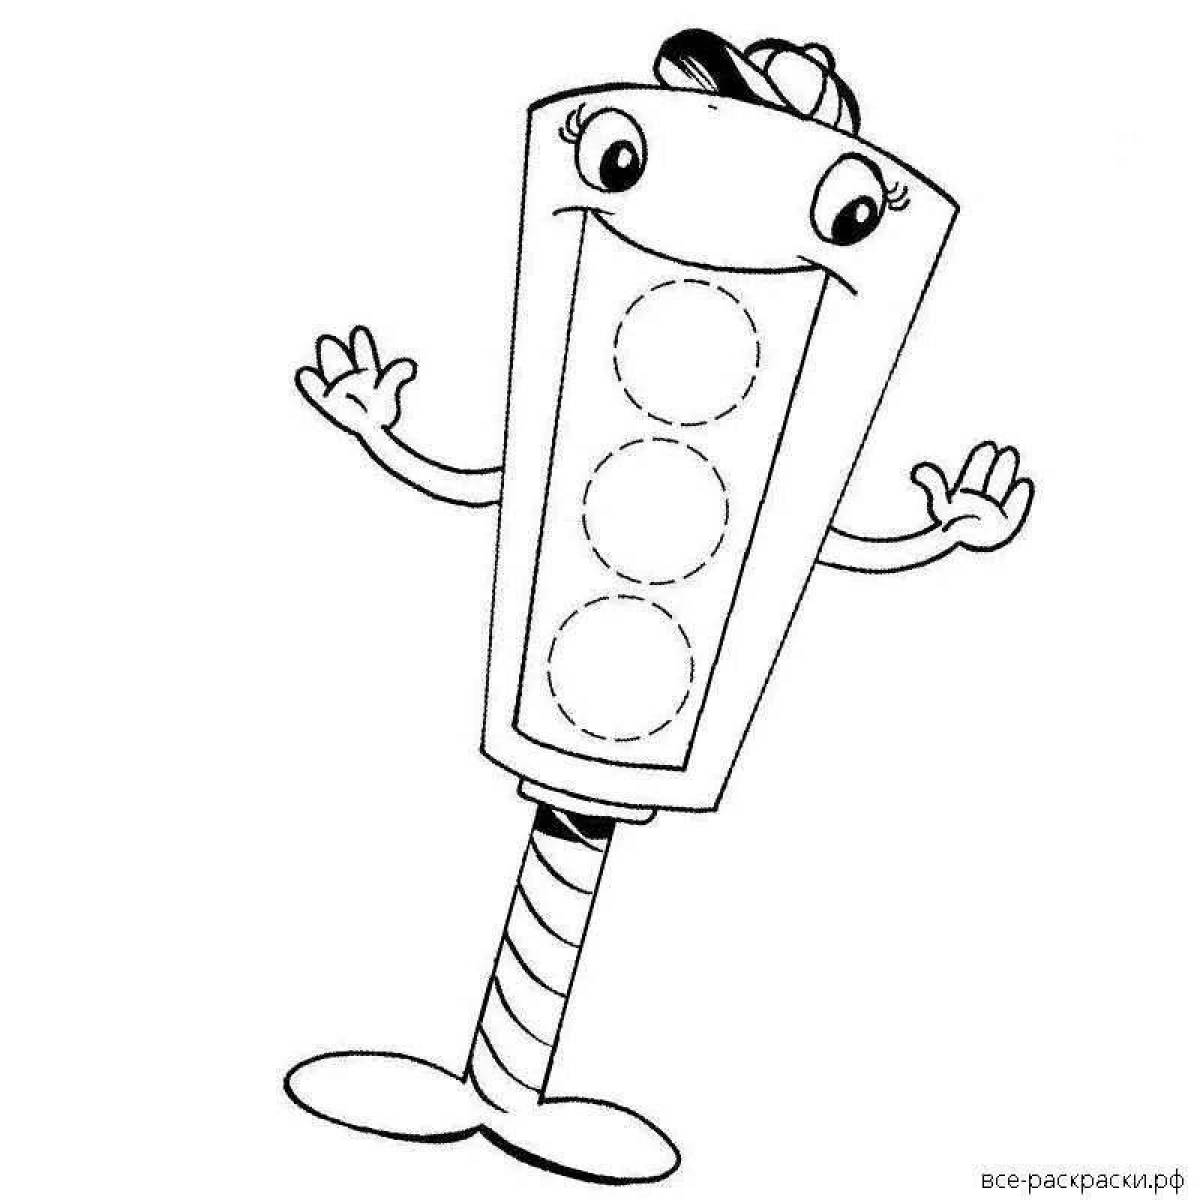 Coloring page joyful traffic light for children 2-3 years old